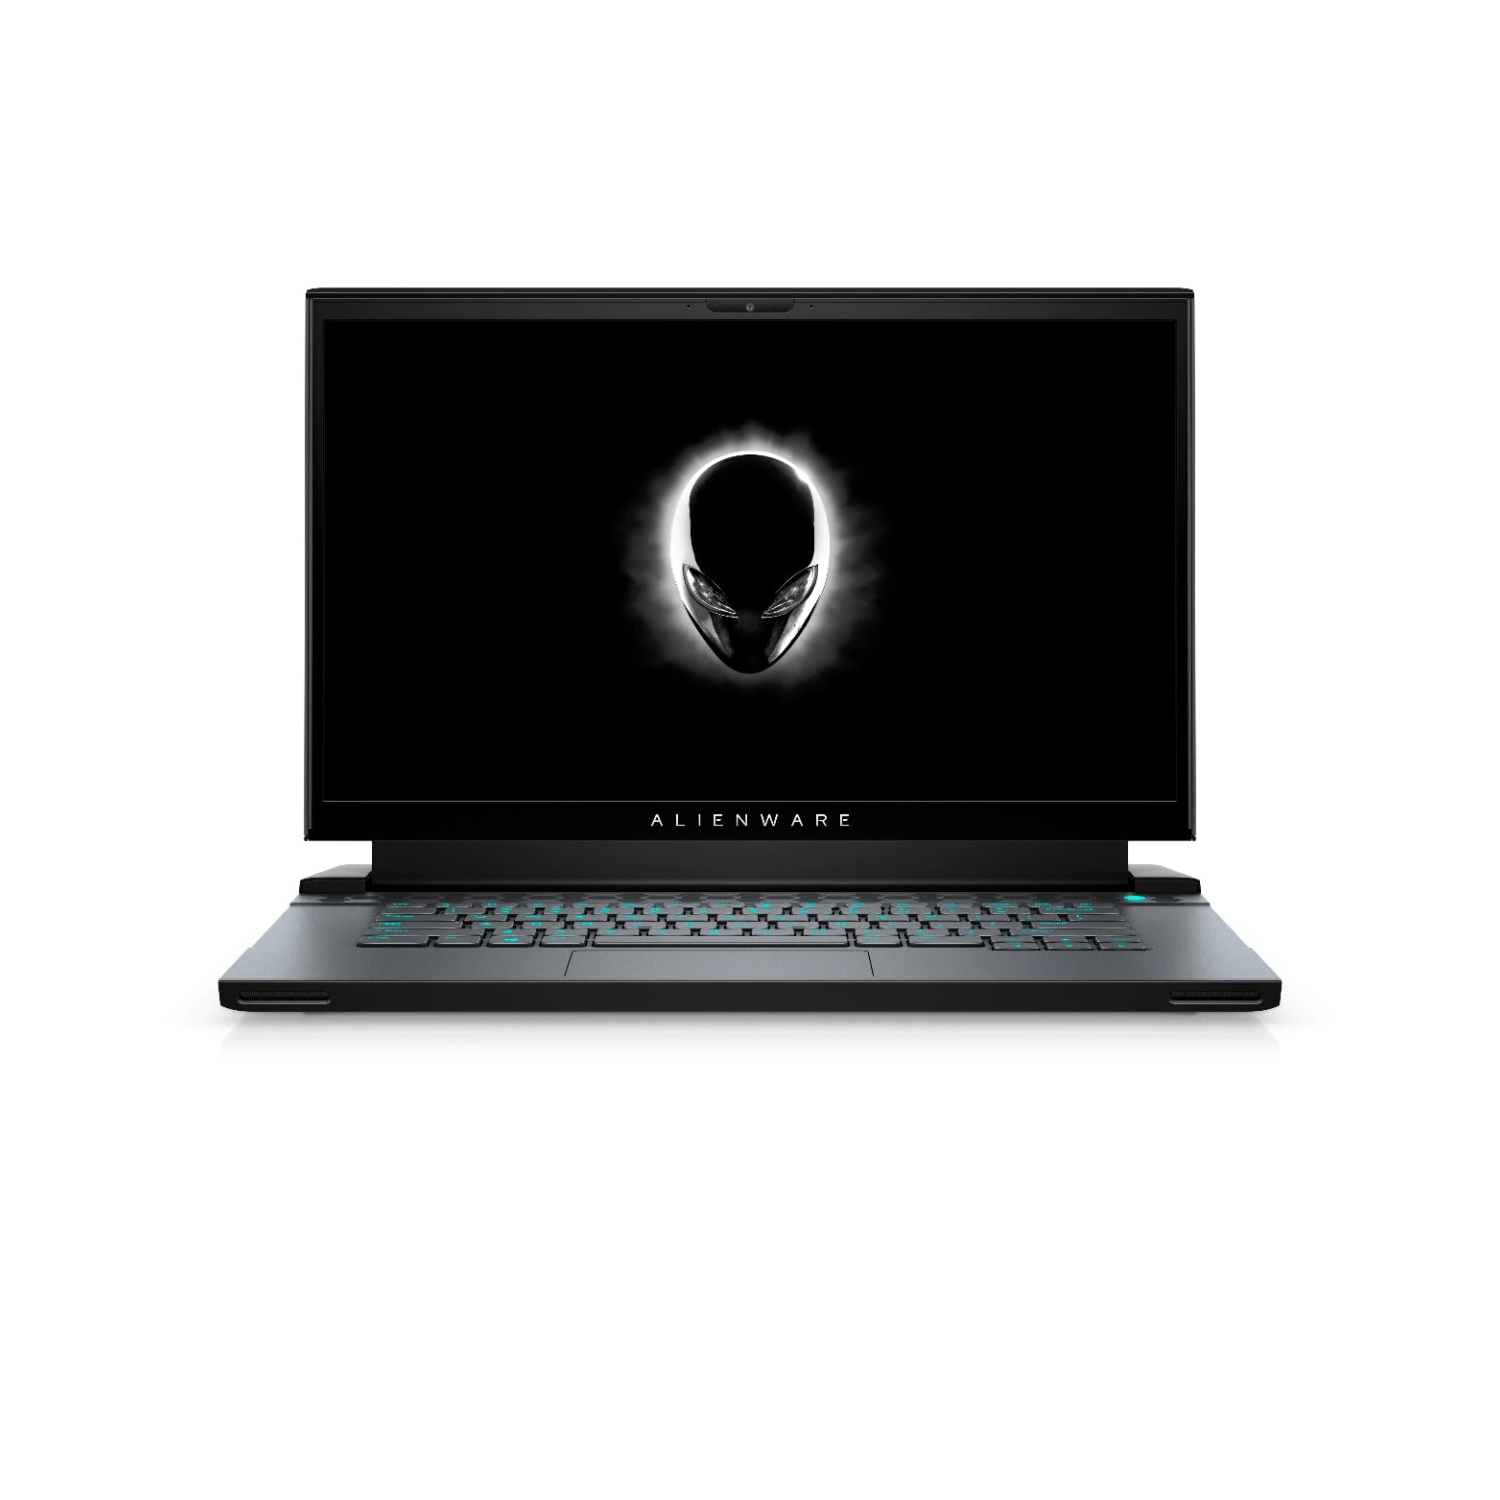 Refurbished (Excellent) - Dell Alienware m15 R4 Gaming Laptop (2021), 15.6" FHD, Core i7, 1TB SSD + 512GB SSD, 32GB RAM, RTX 3080, 5 GHz, 10th Gen CPU Certified